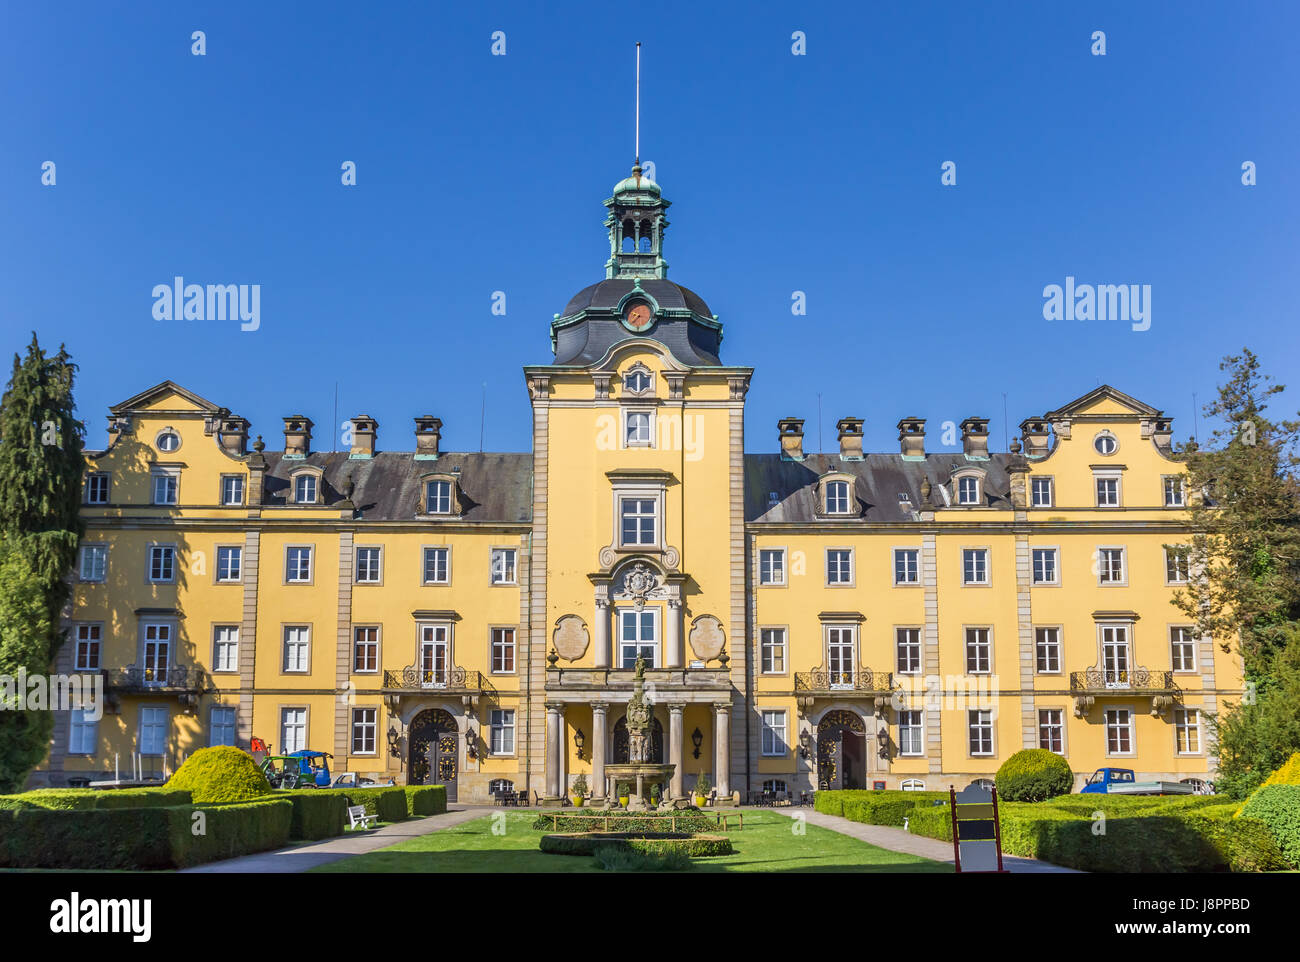 Front of the main building of the Buckeburg Palace in Lower Saxony, Germany Stock Photo